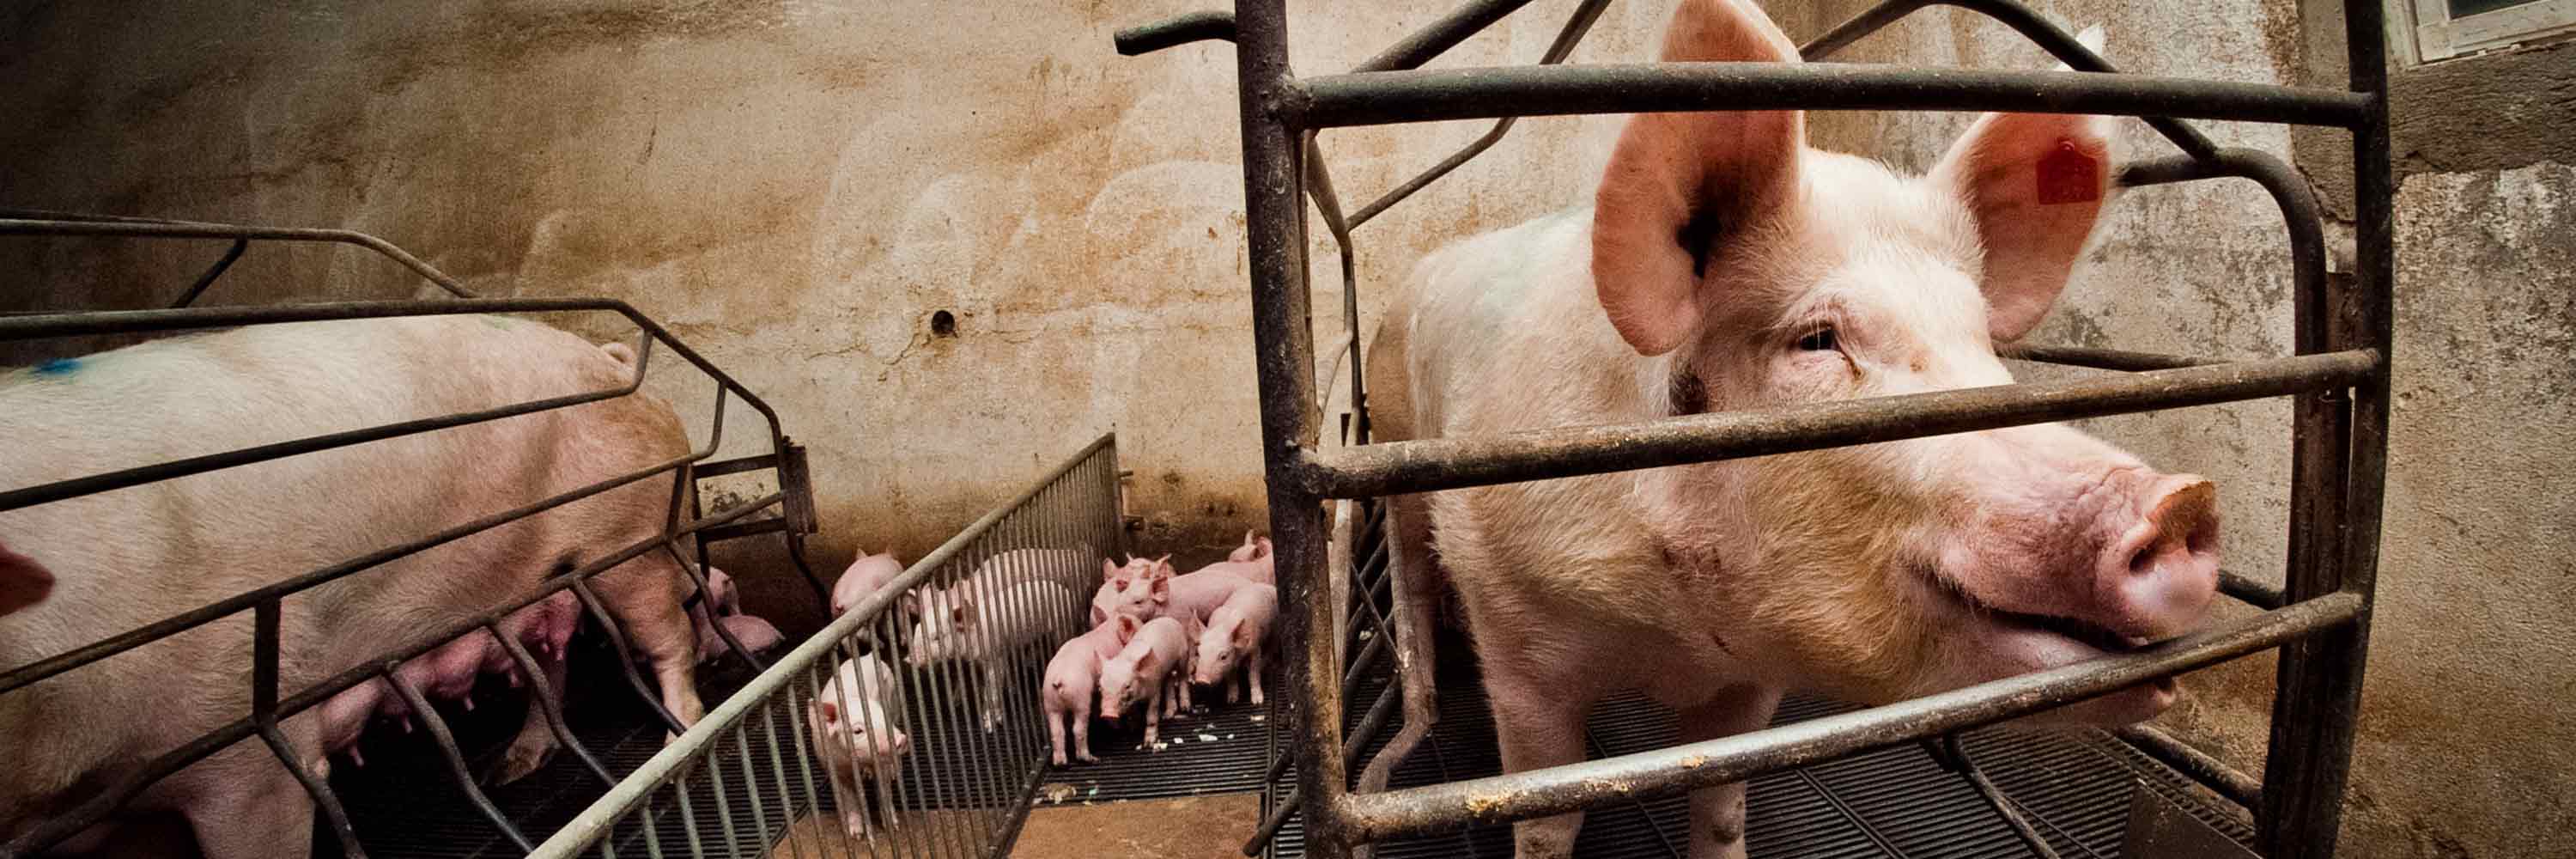 Farrowing crate with piglets